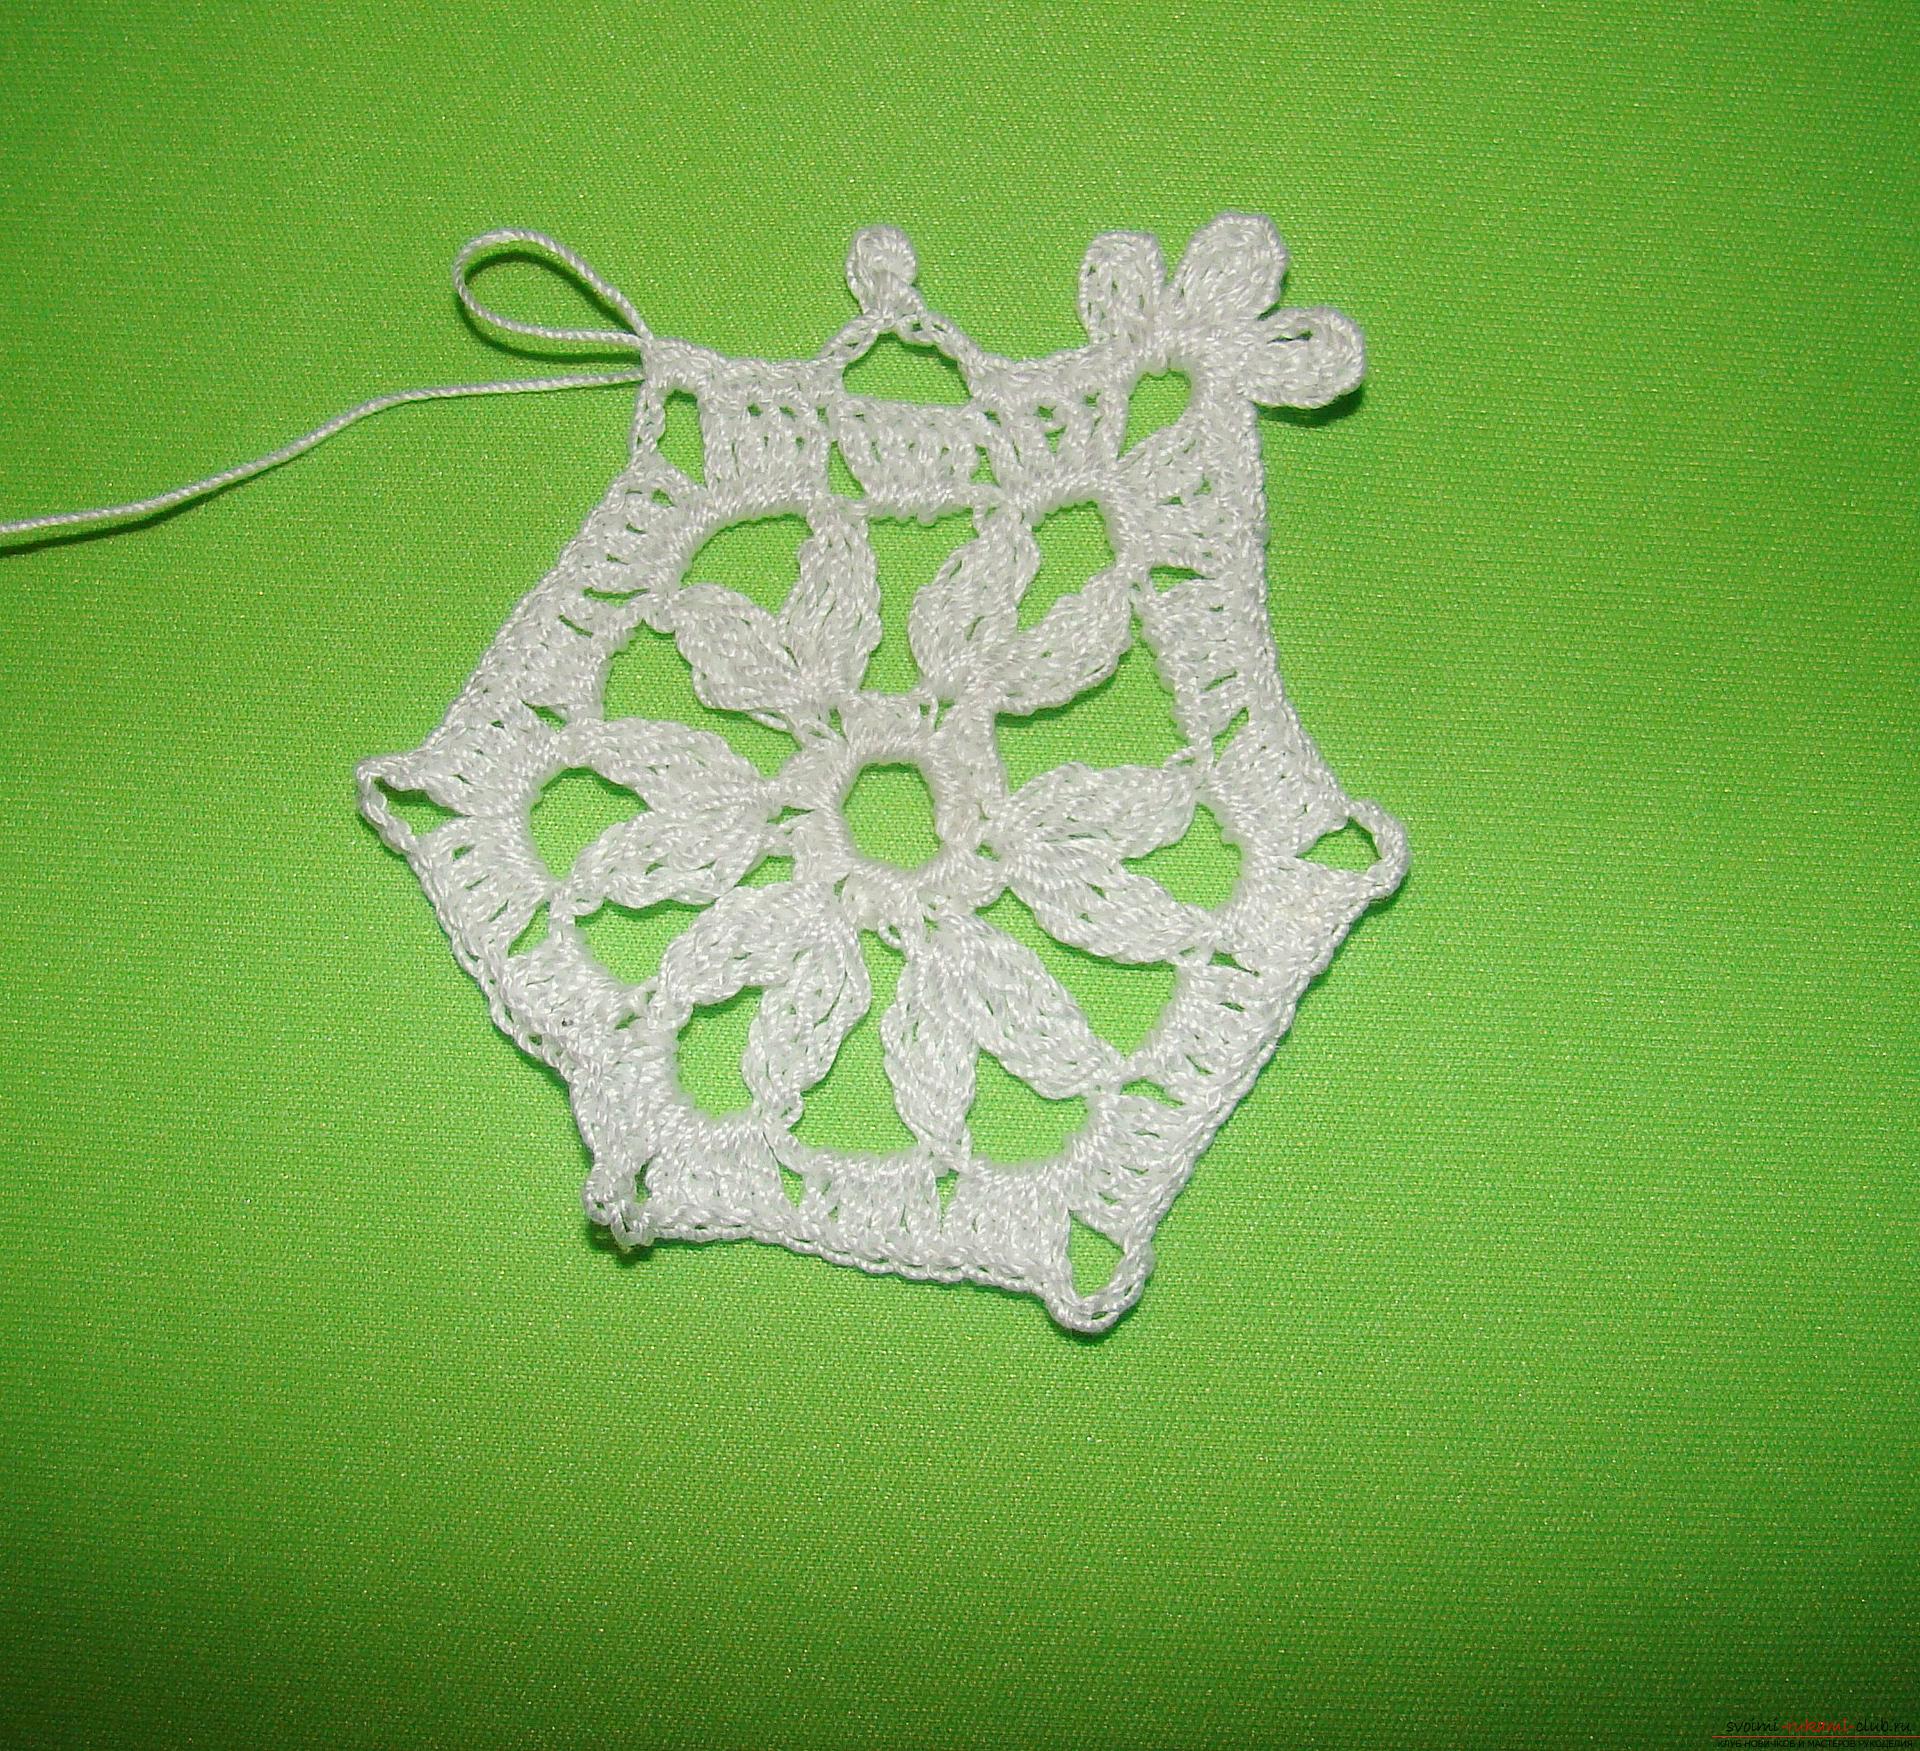 A master class with a photo and diagram will teach you how to tie snowflakes to a Christmas tree crochet. Photo number 15